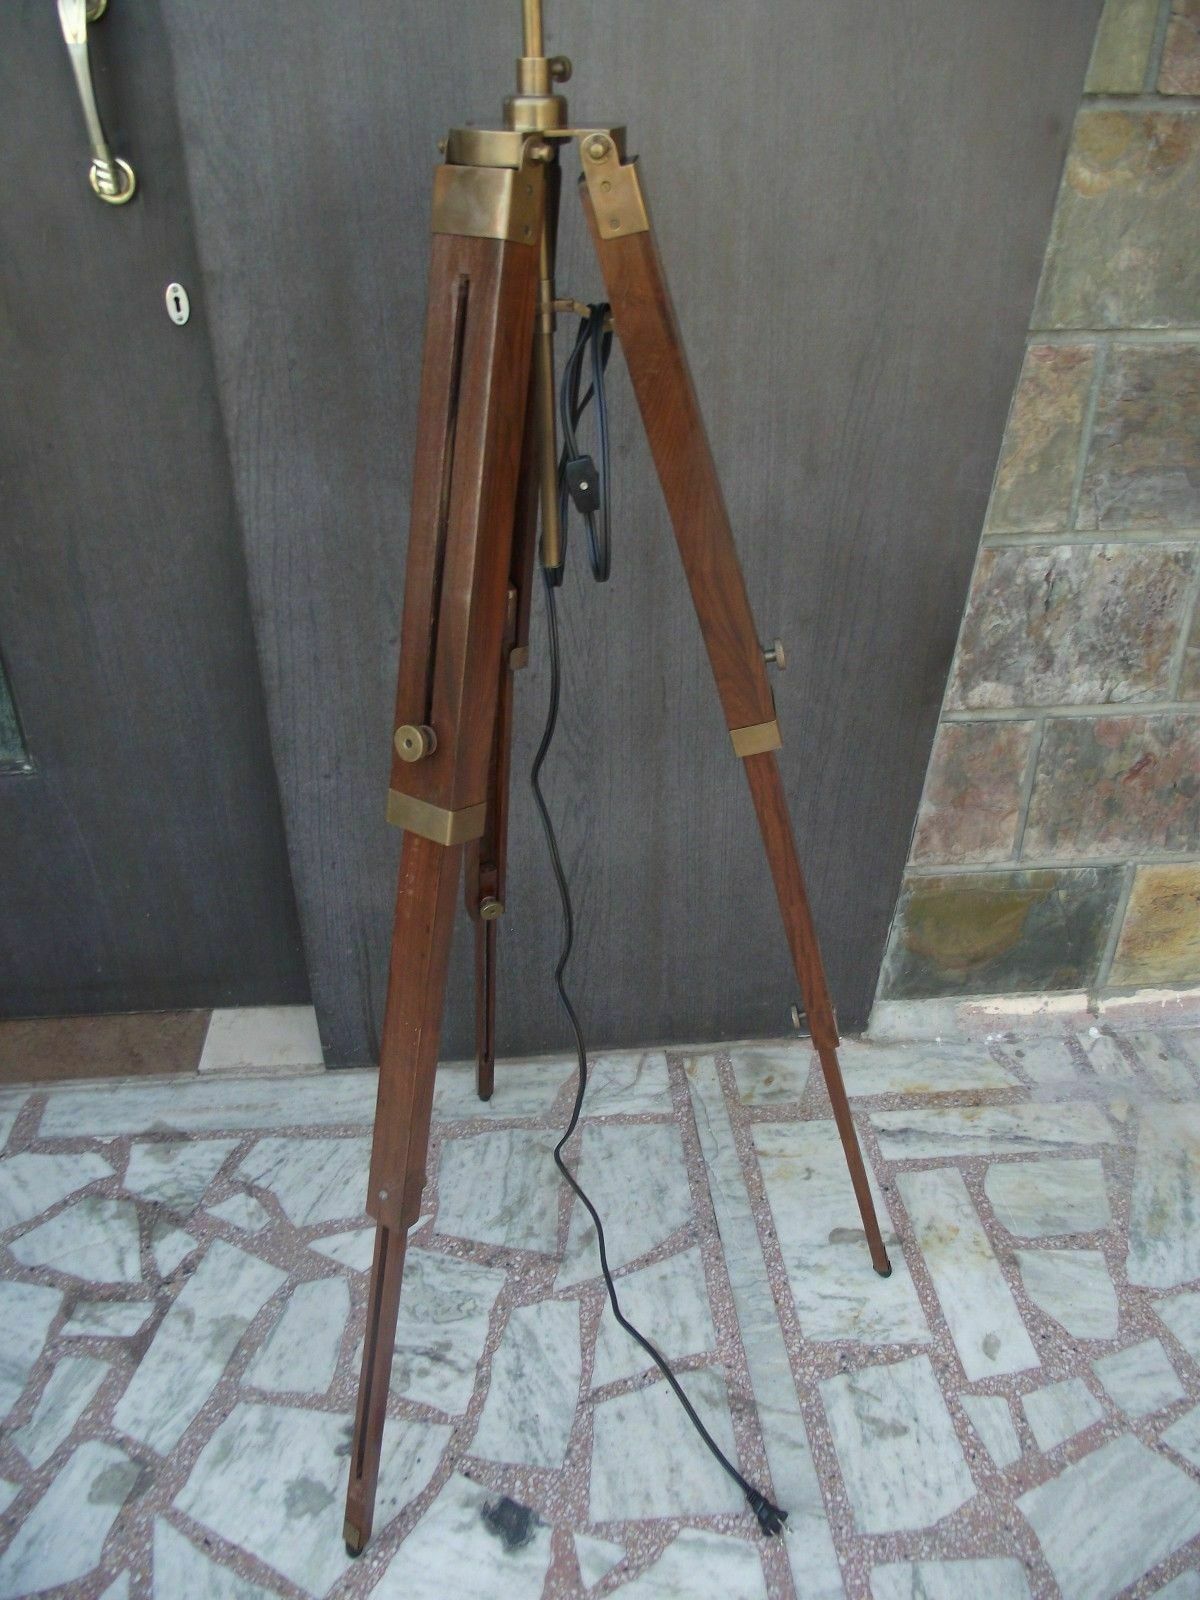 WOODEN ANTIQUE ROYAL NAUTICAL TRIPOD FLOOR LAMP STAND SHADE TRIPOD GIFT/DECORE